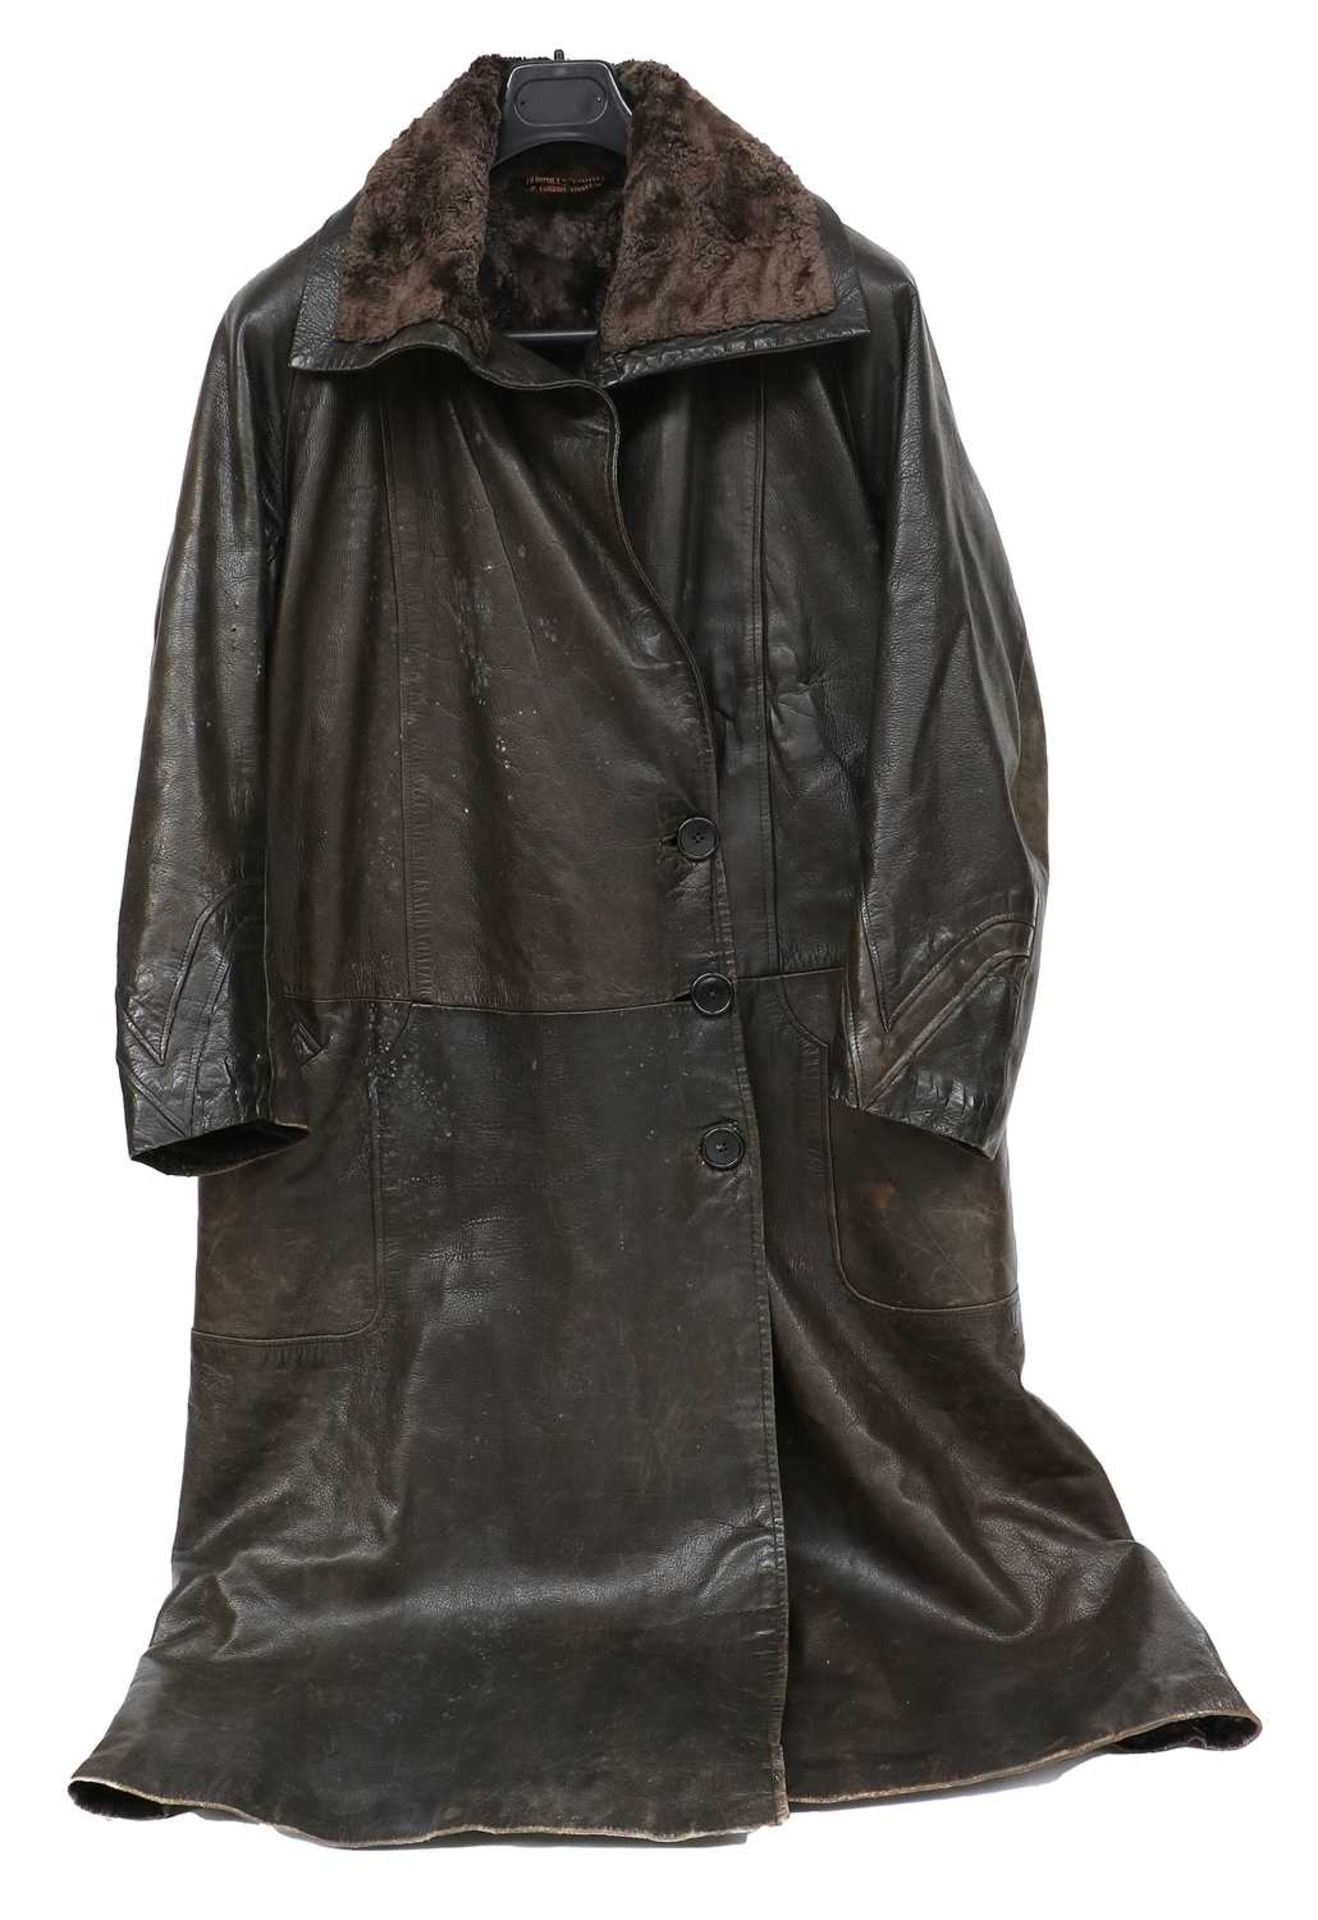 A Black and Brown Leather Driving Coat, Dunhills Ltd, 2 Conduit Street, London, with fur lining,